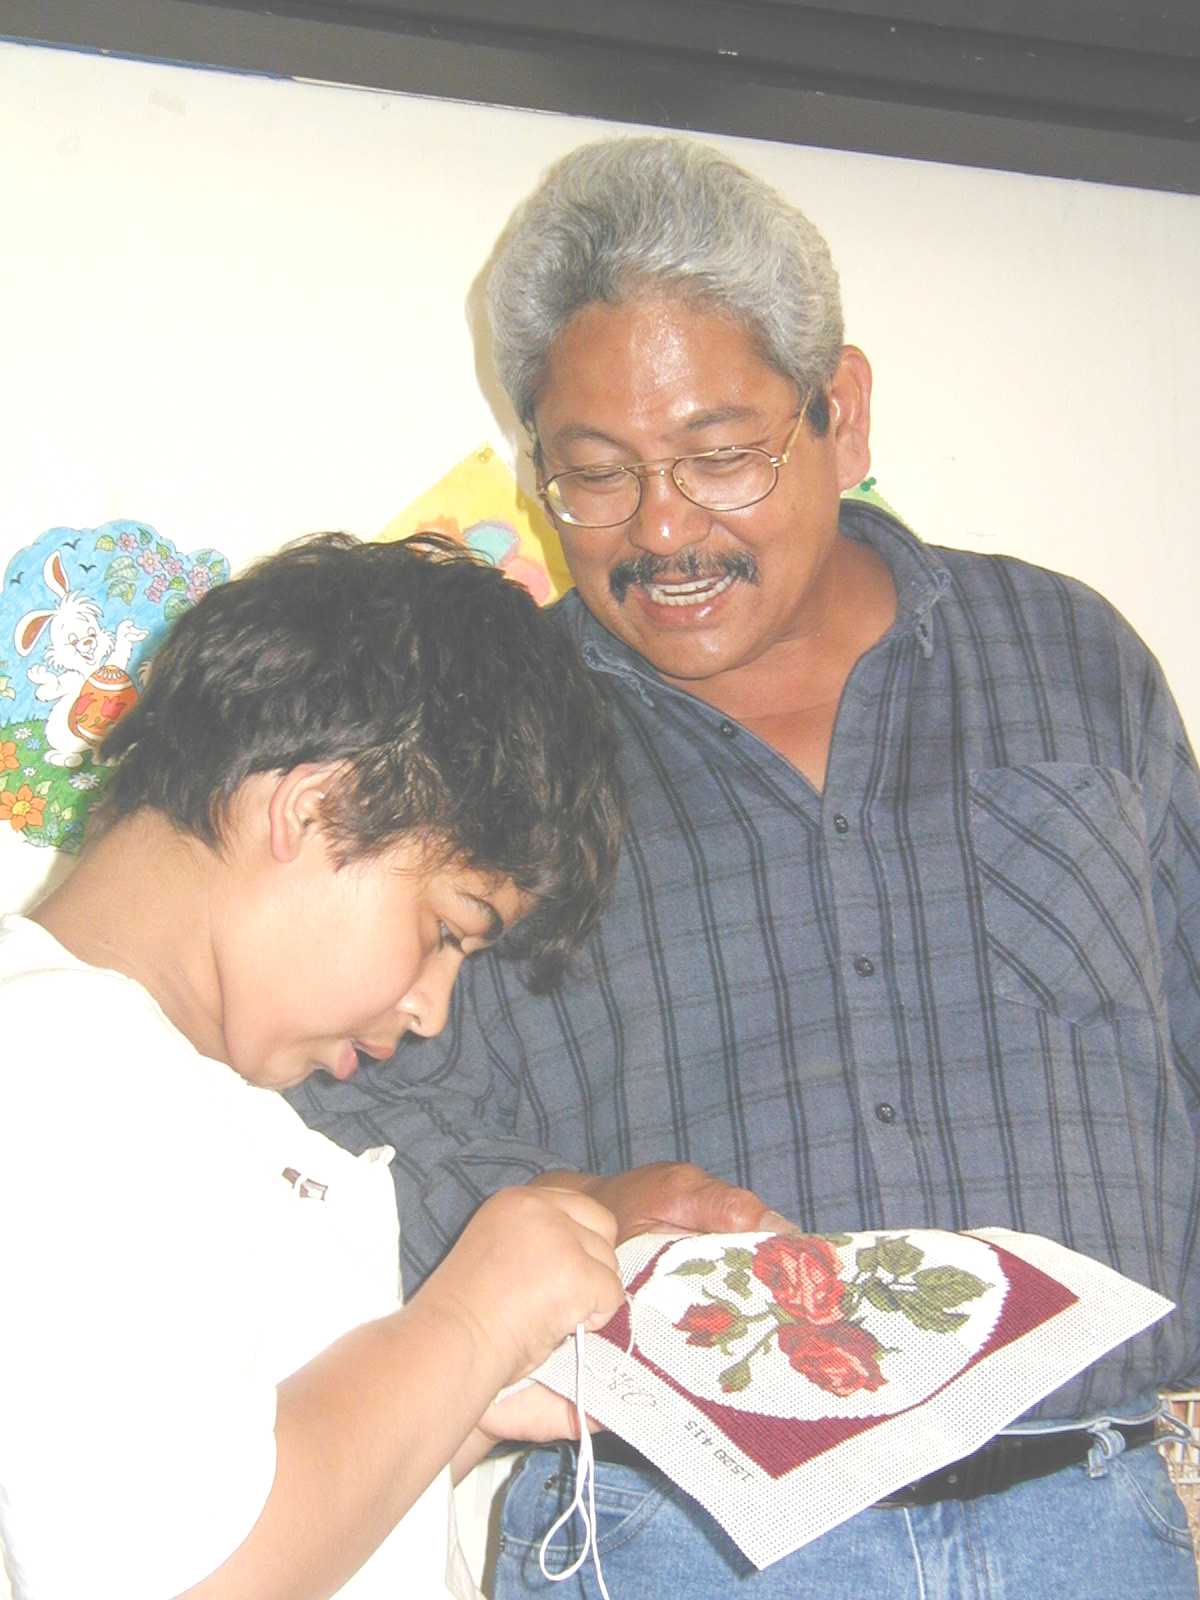 Frank Mendiola admires a child from the sewing class, Barcs, Hungary.